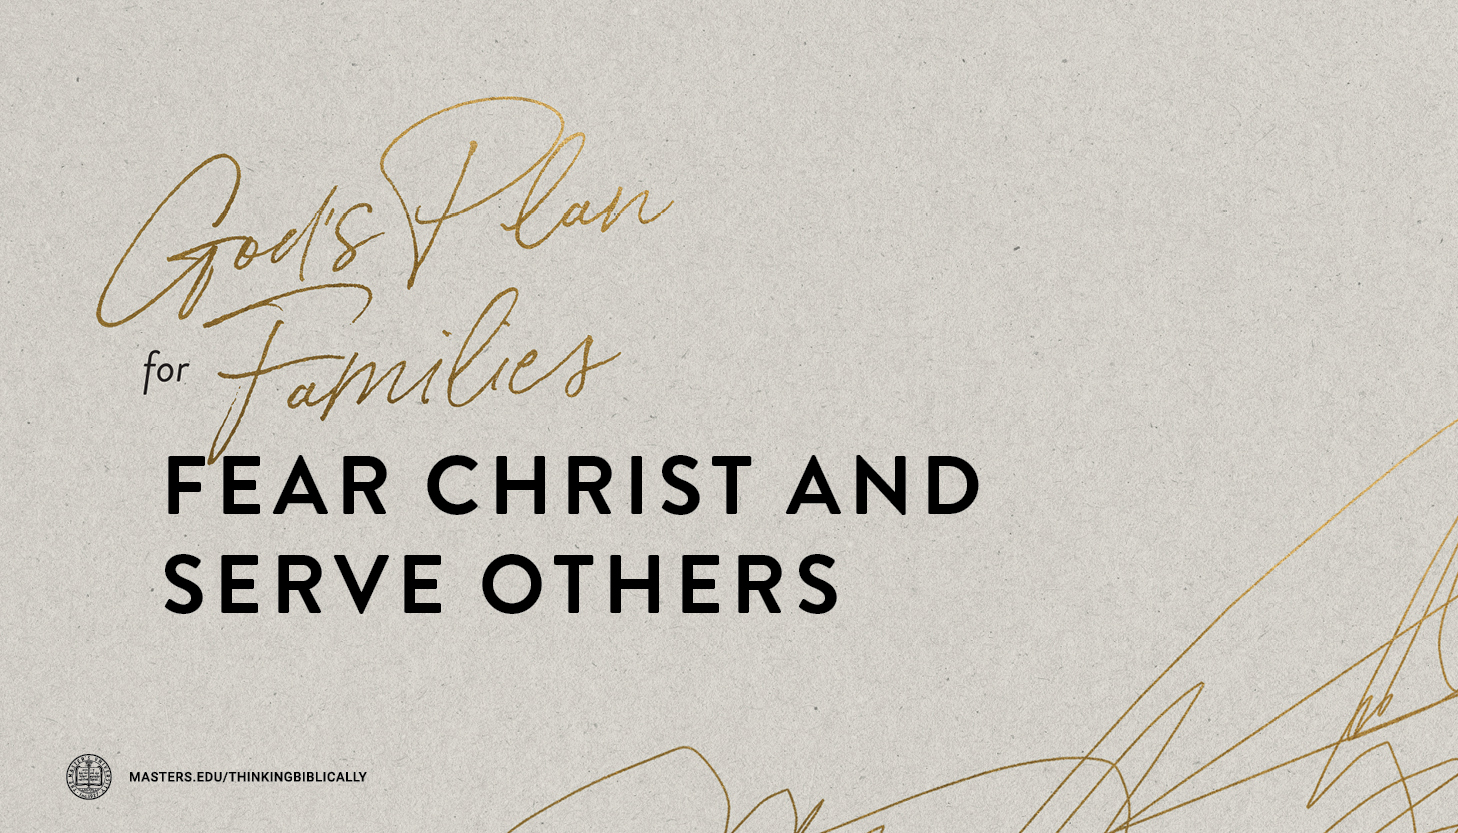 Fear Christ and Serve Others Featured Image